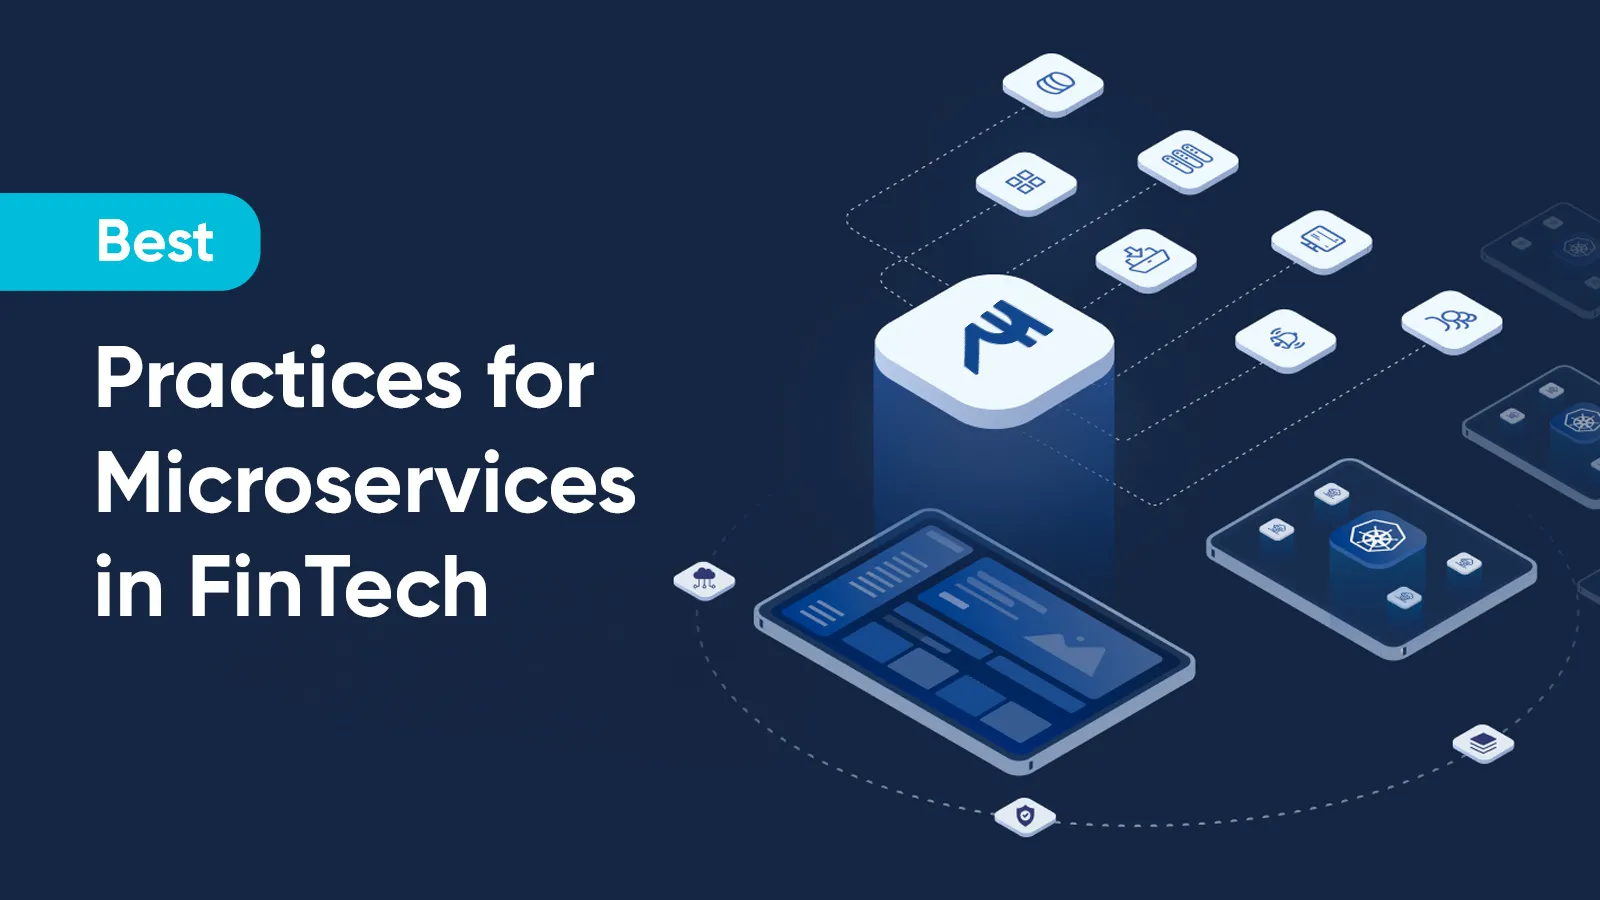 Best Practices for Microservices in FinTech